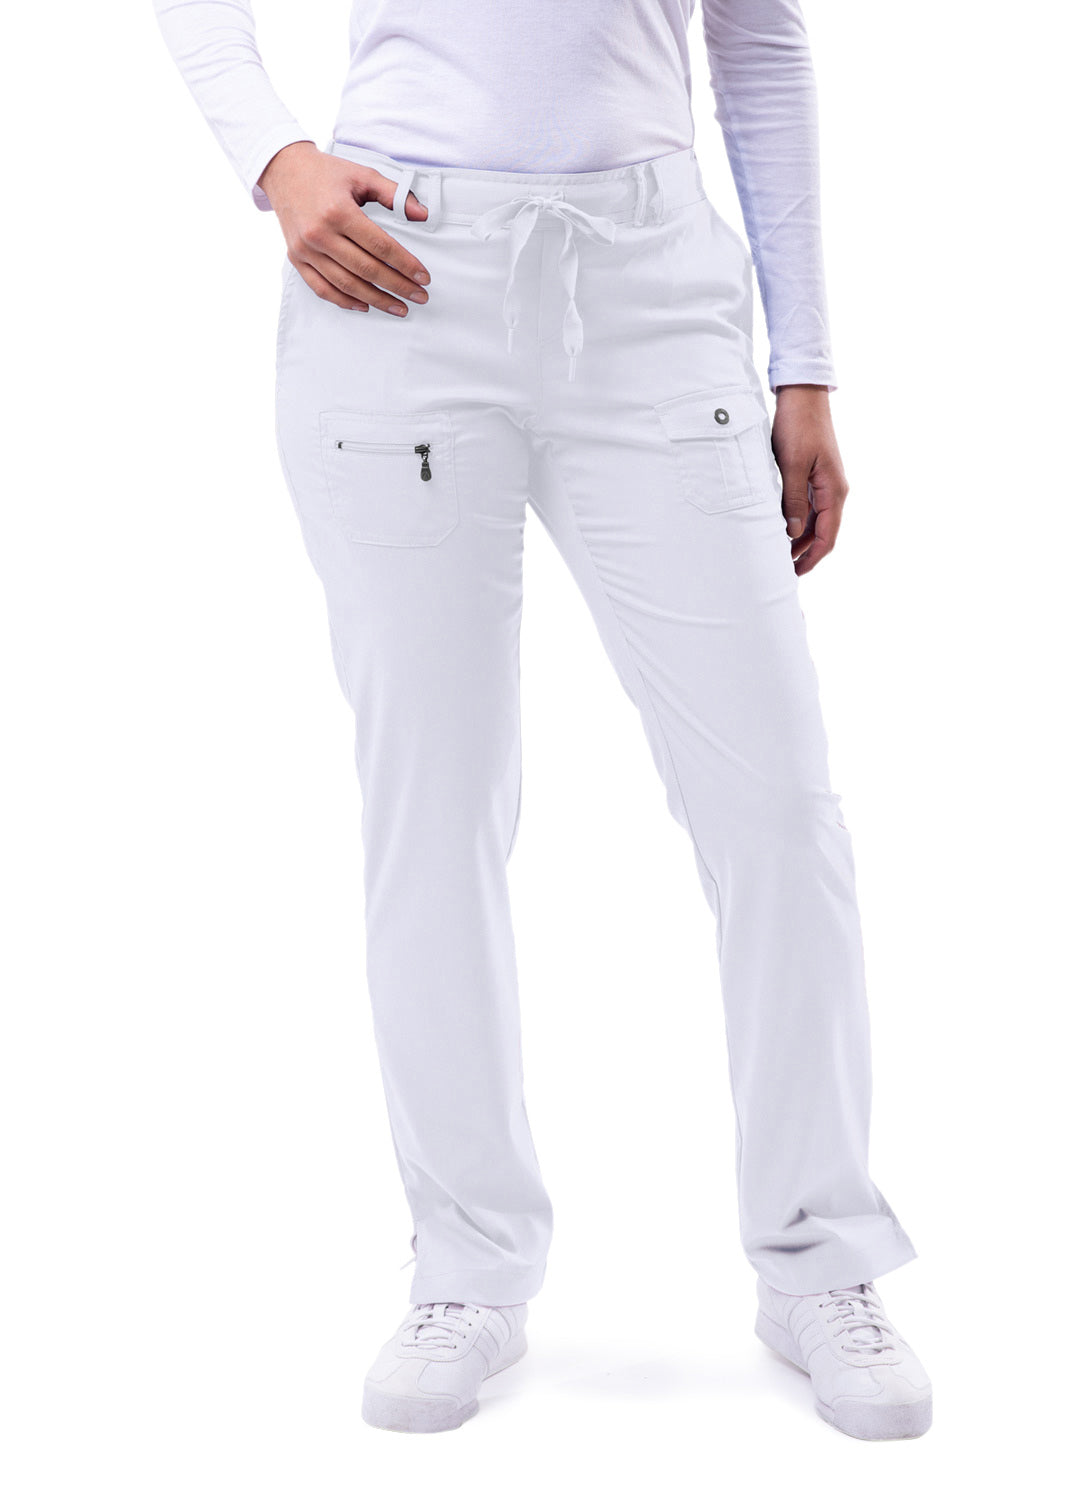 Adar Addition white 6 pocket fitted pants Sonay Uniforms